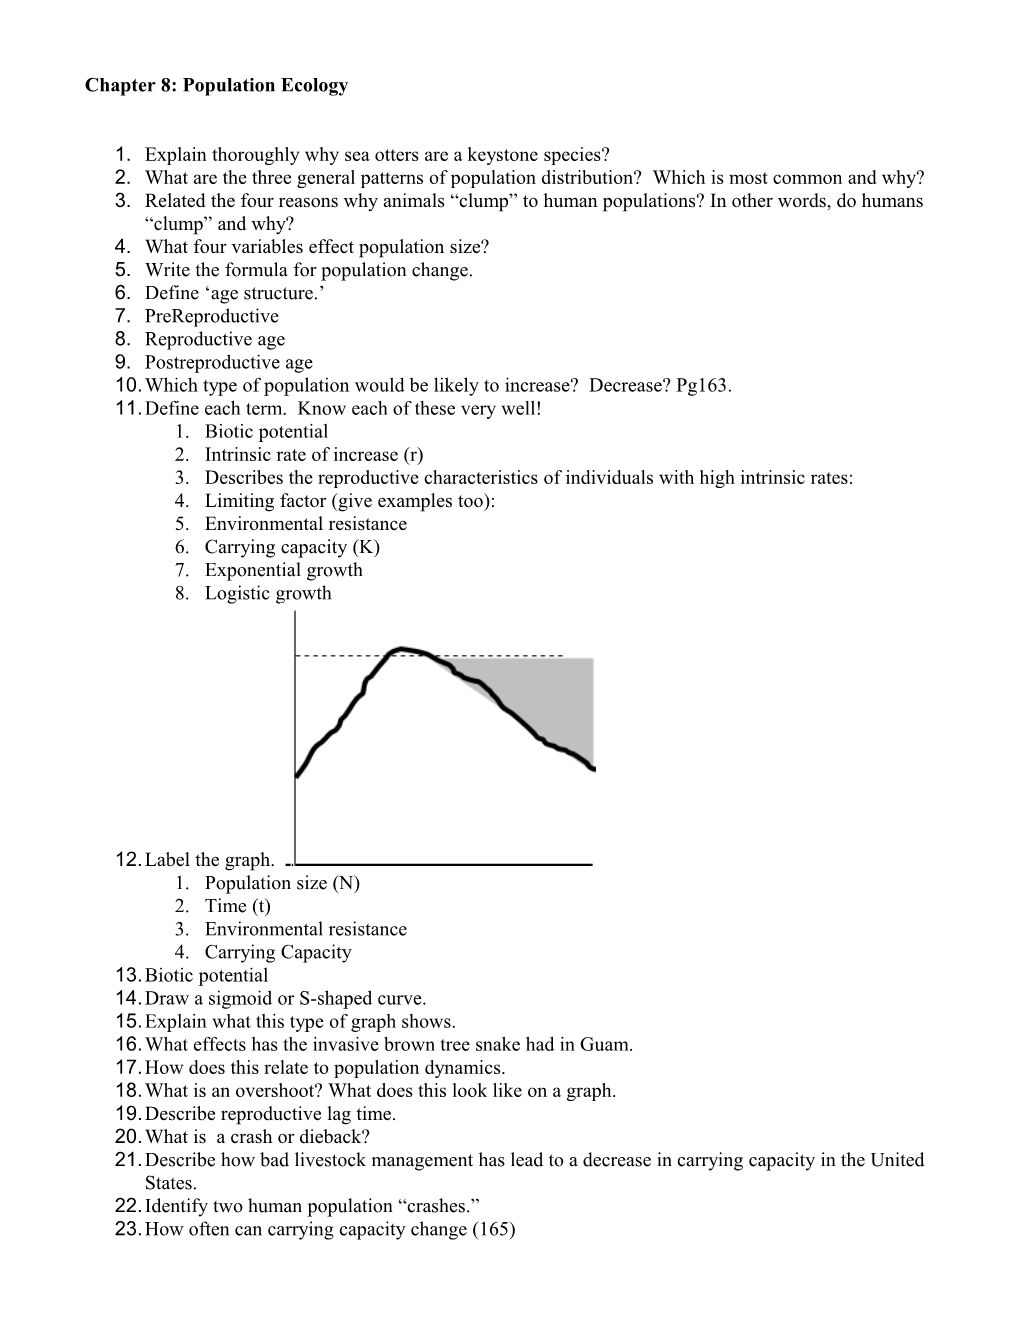 Advanced Placement Environmental Science 2008-2009 Summer Assignment